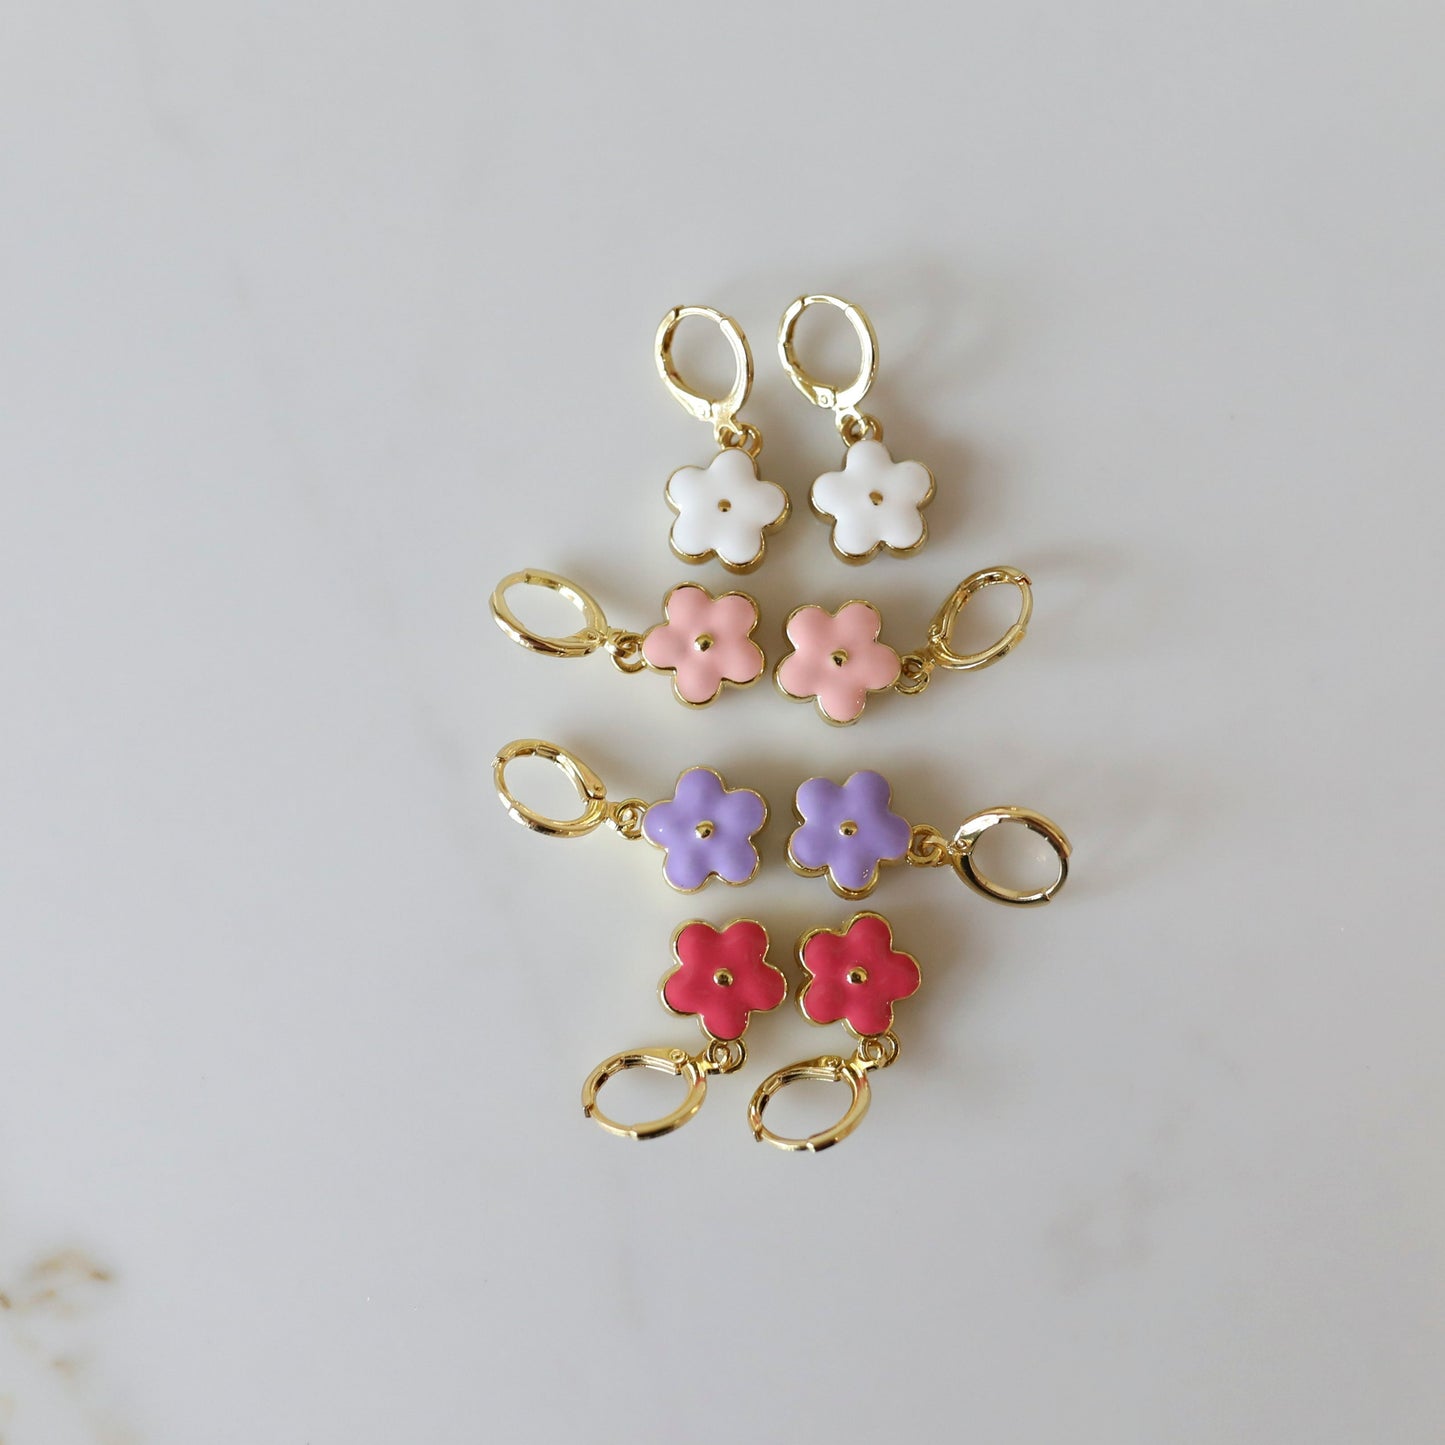 Daisy Hoop earrings available in four cute pastel colors